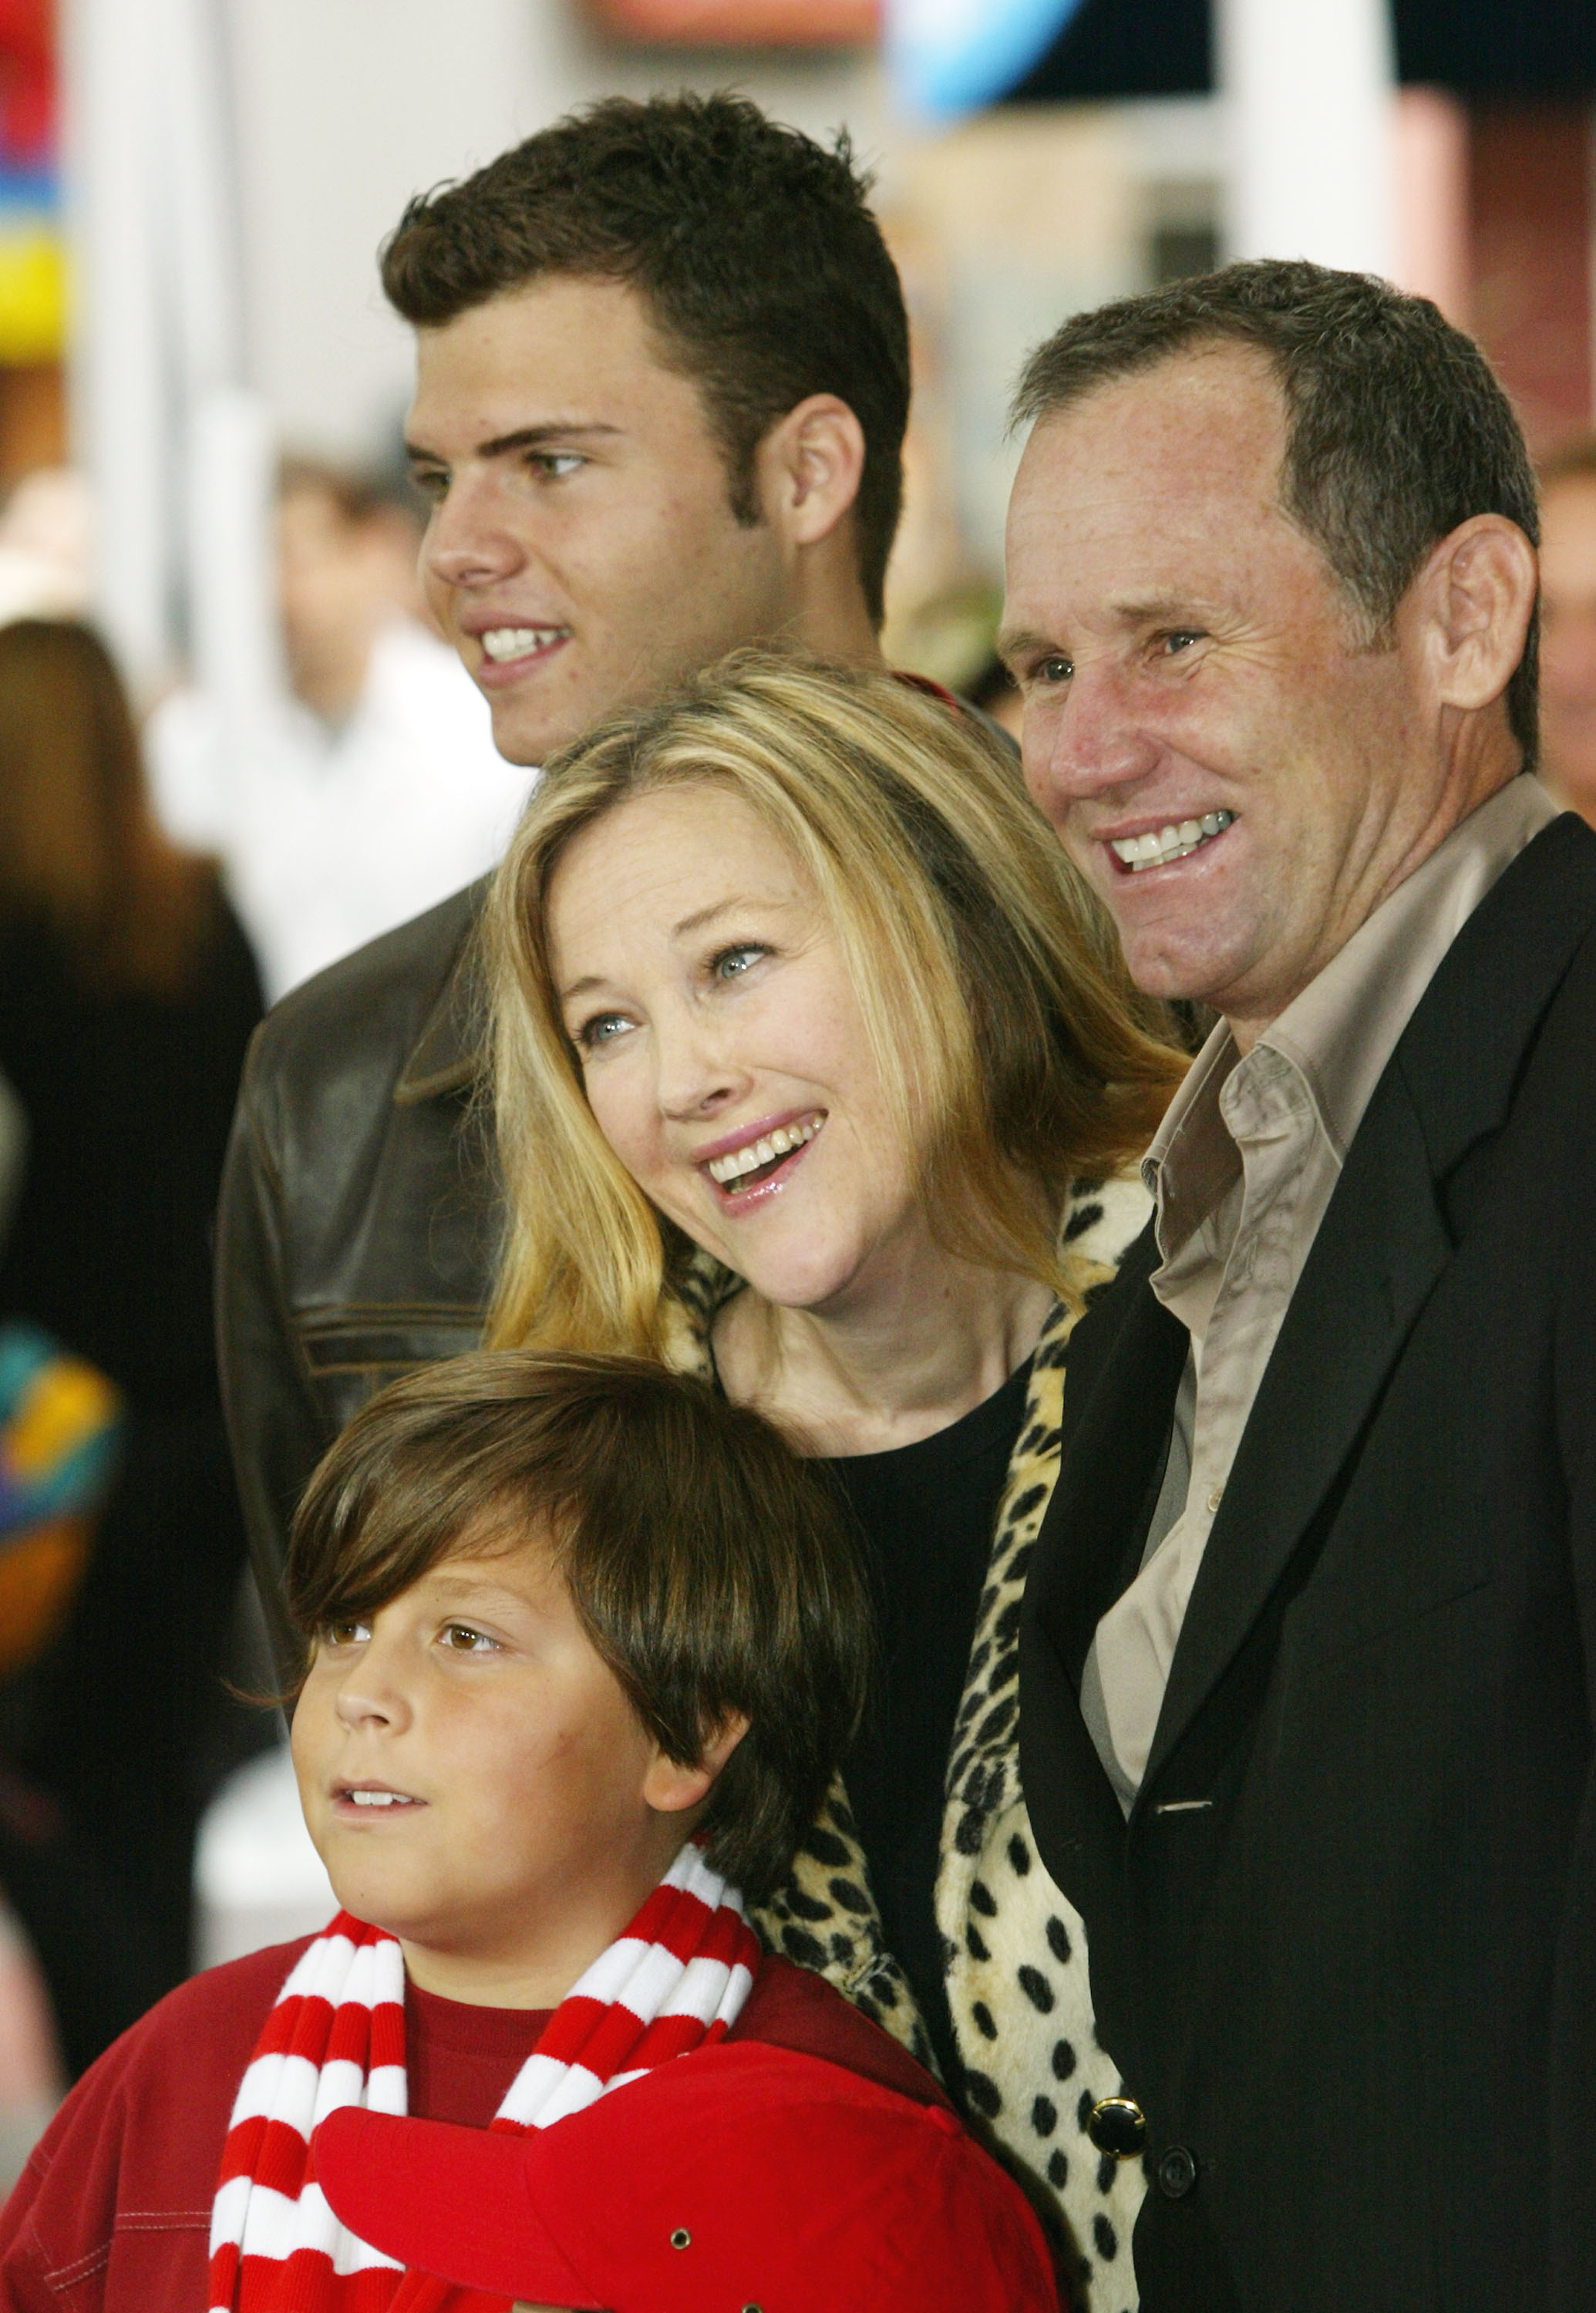 Bo Welch and actress Catherine O'Hara with their children at the world premiere of "Dr. Seuss' The Cat in the Hat" at Universal Studios, November 8, 2003 in Hollywood, California. | Source: Getty Images